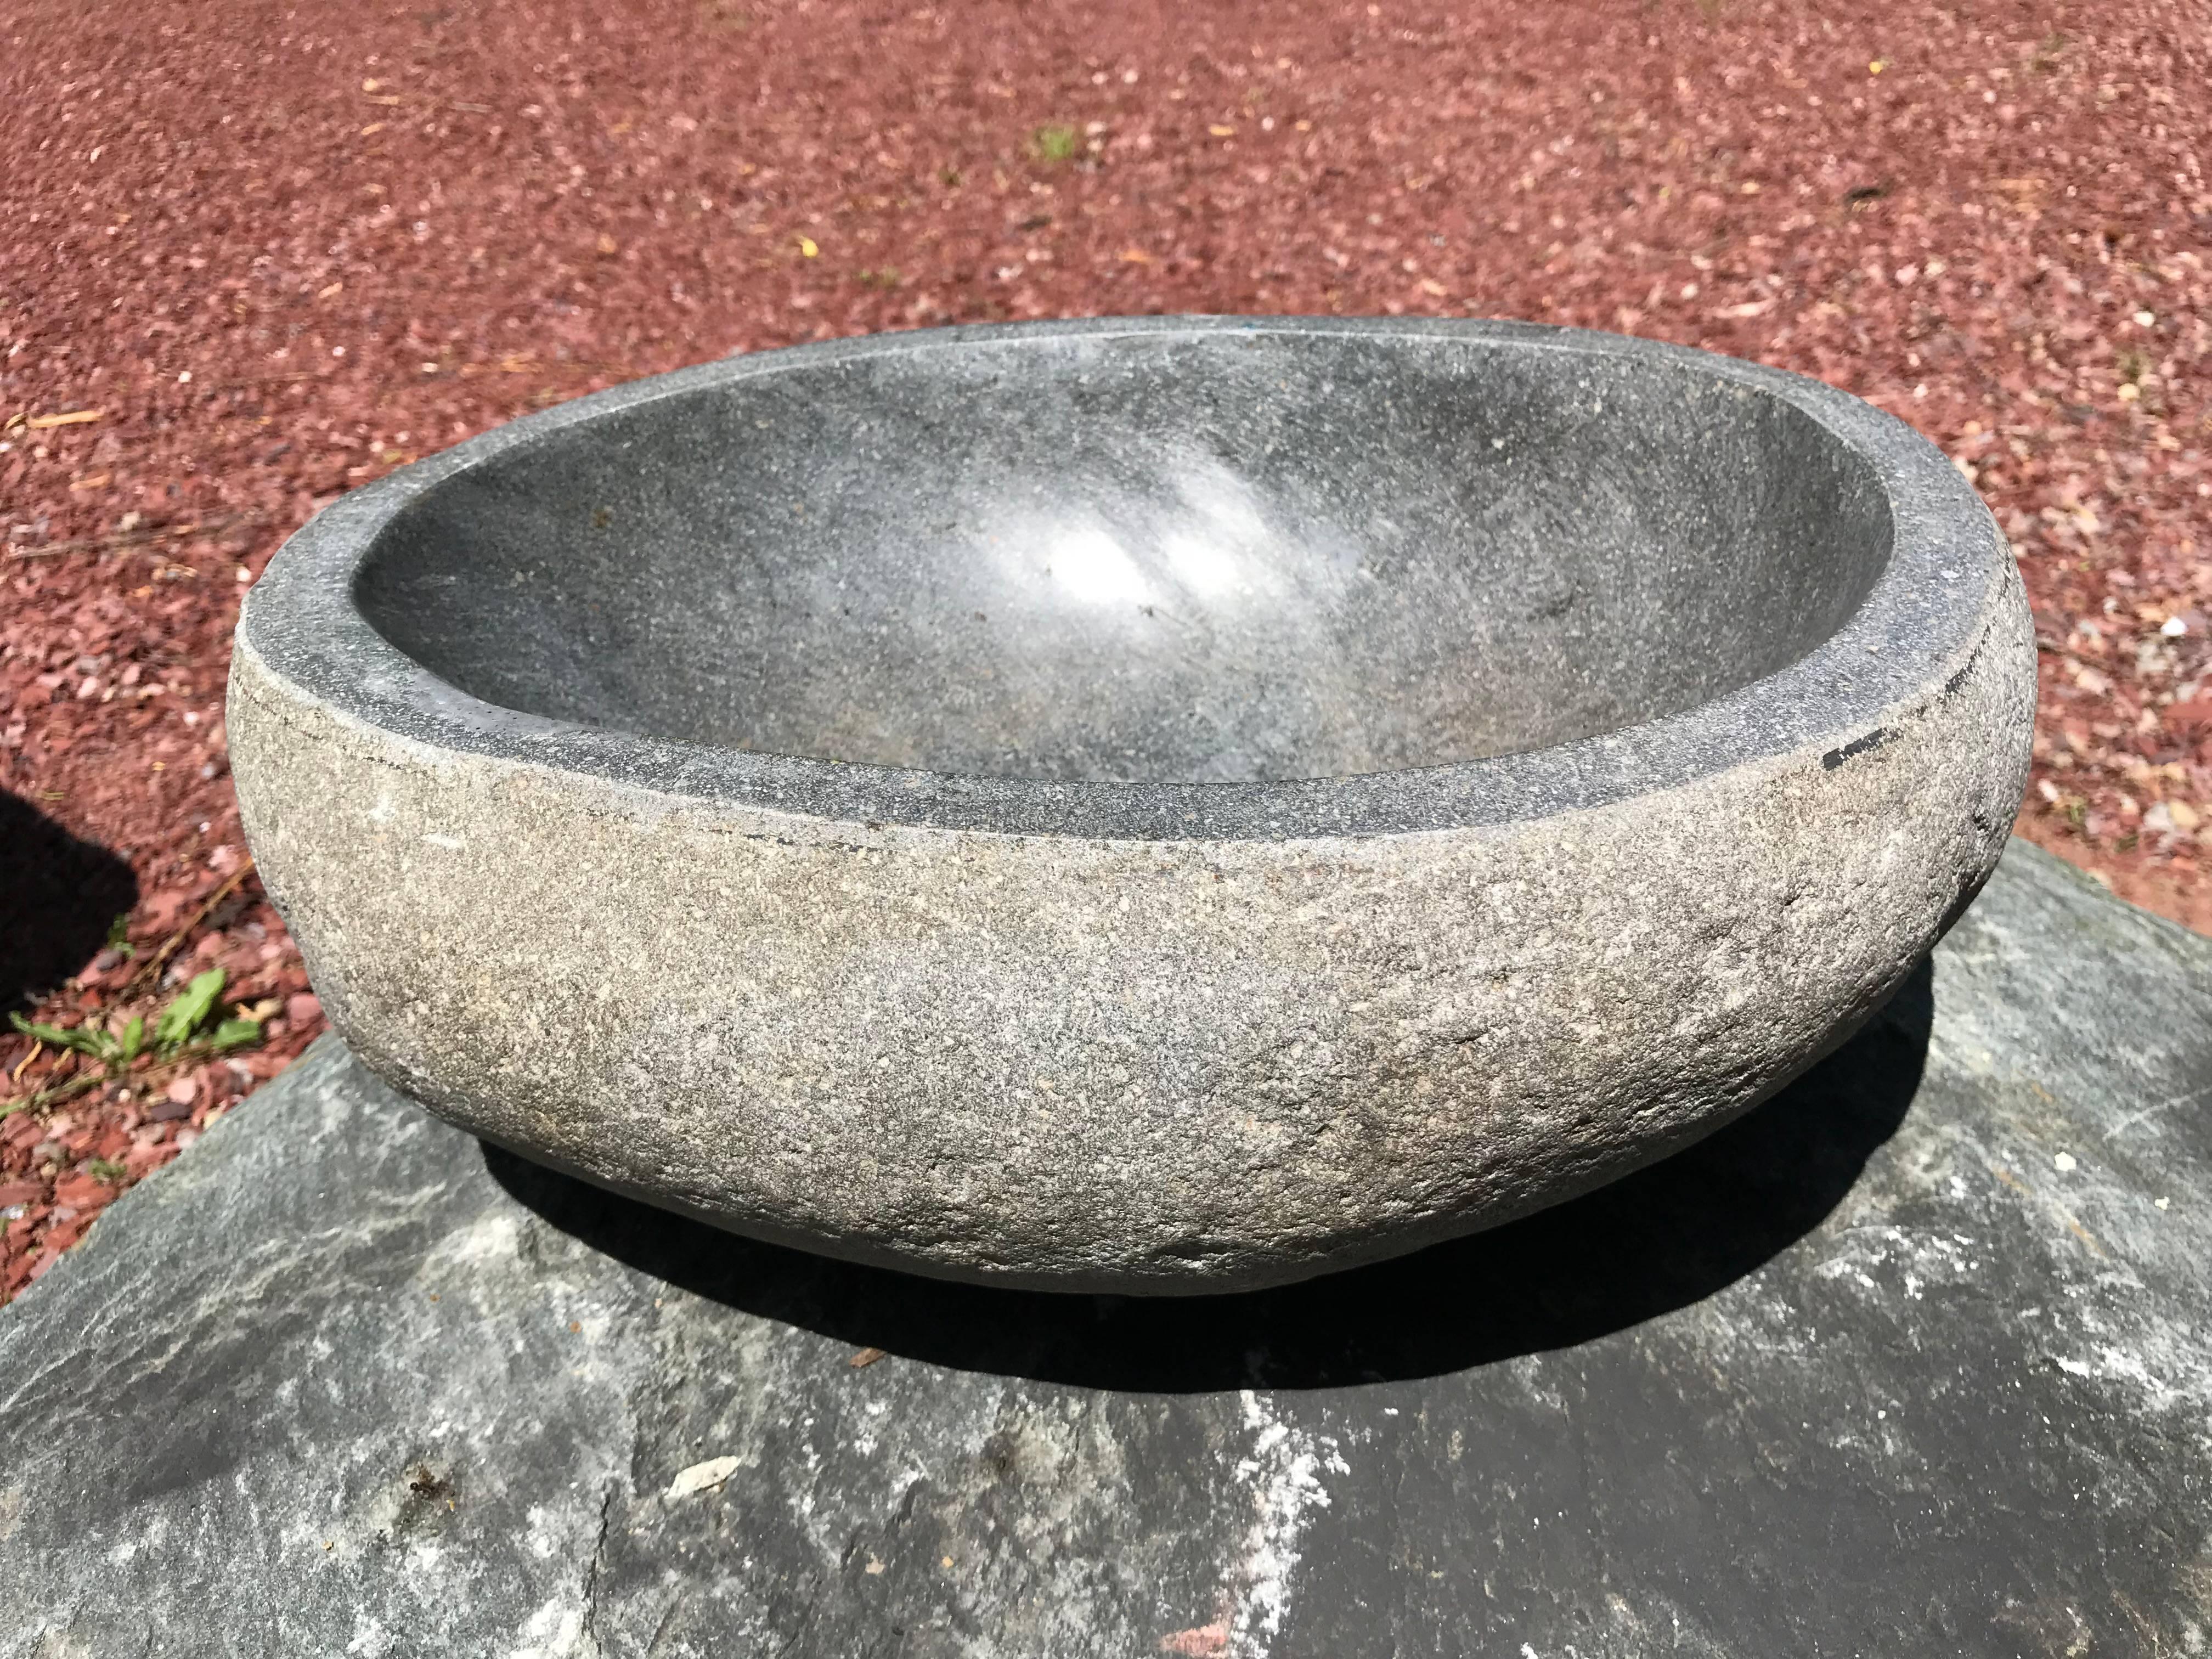 A one-of-a-kind visually attractive hand carved solid stone 
garden planter or water basin hand-carved from a natural river boulder.

In an organic natural form.

Beautiful simple design. Inside smooth to the touch.

Totally natural color